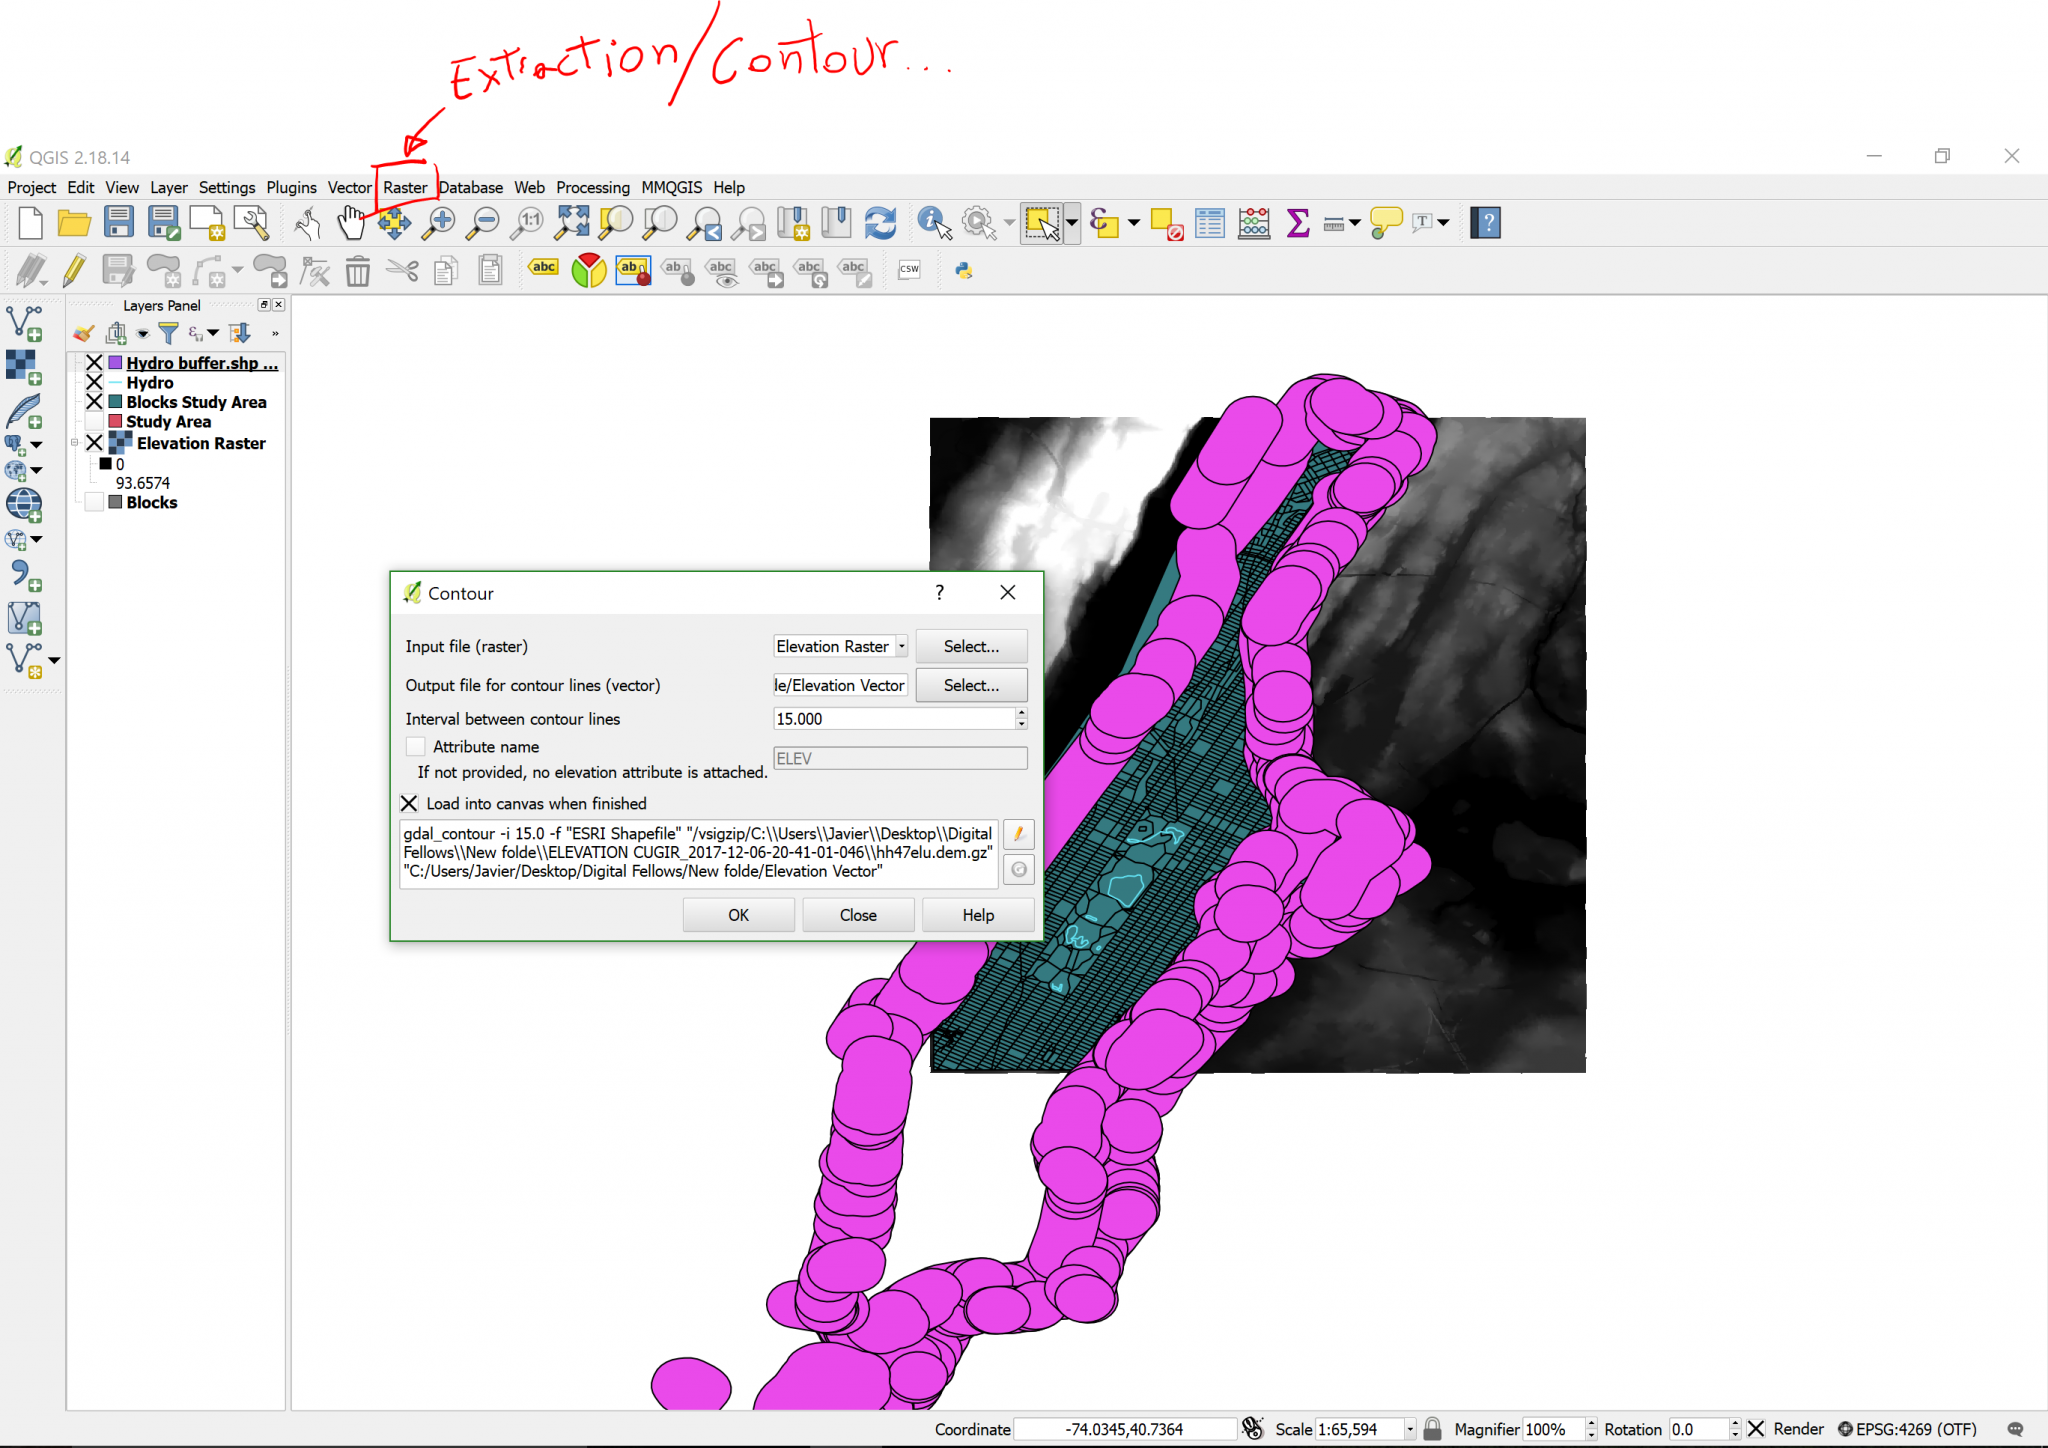 Extracting the Contour of the Raster Layer